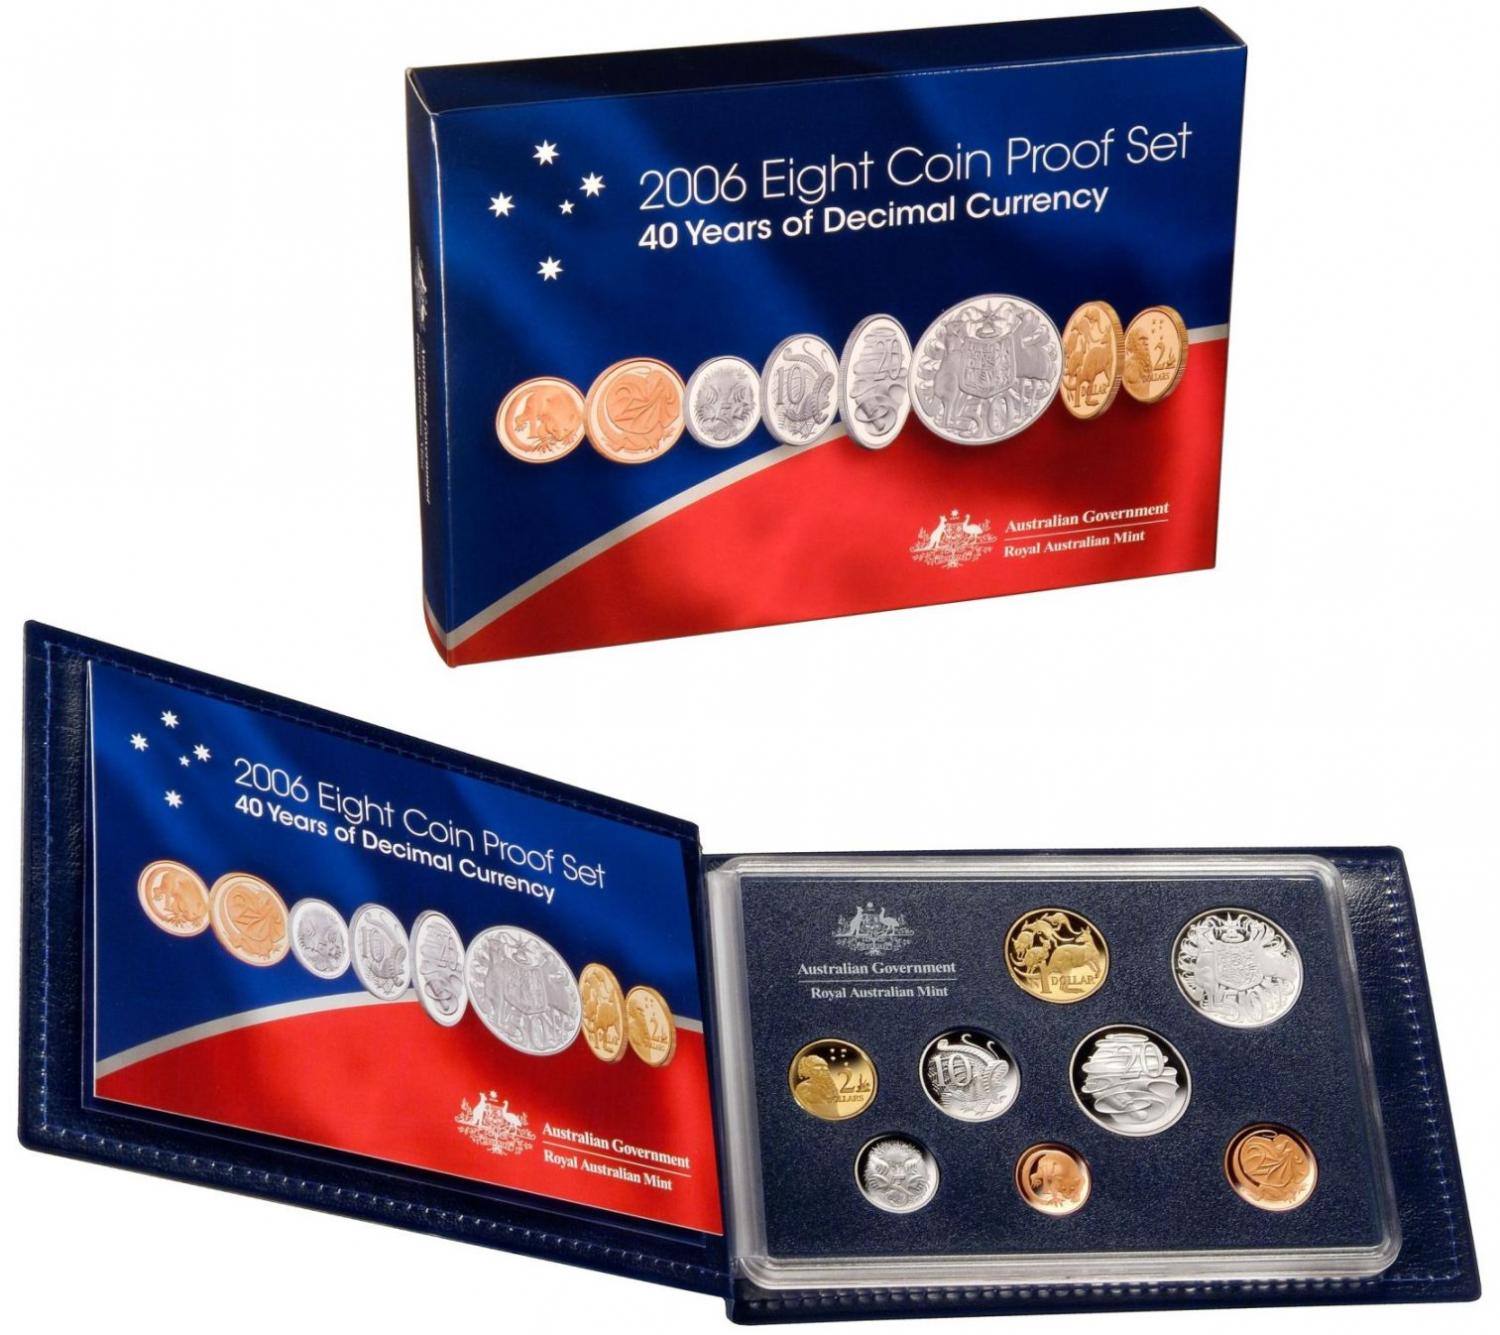 Thumbnail for 2006 Proof Set of Coins